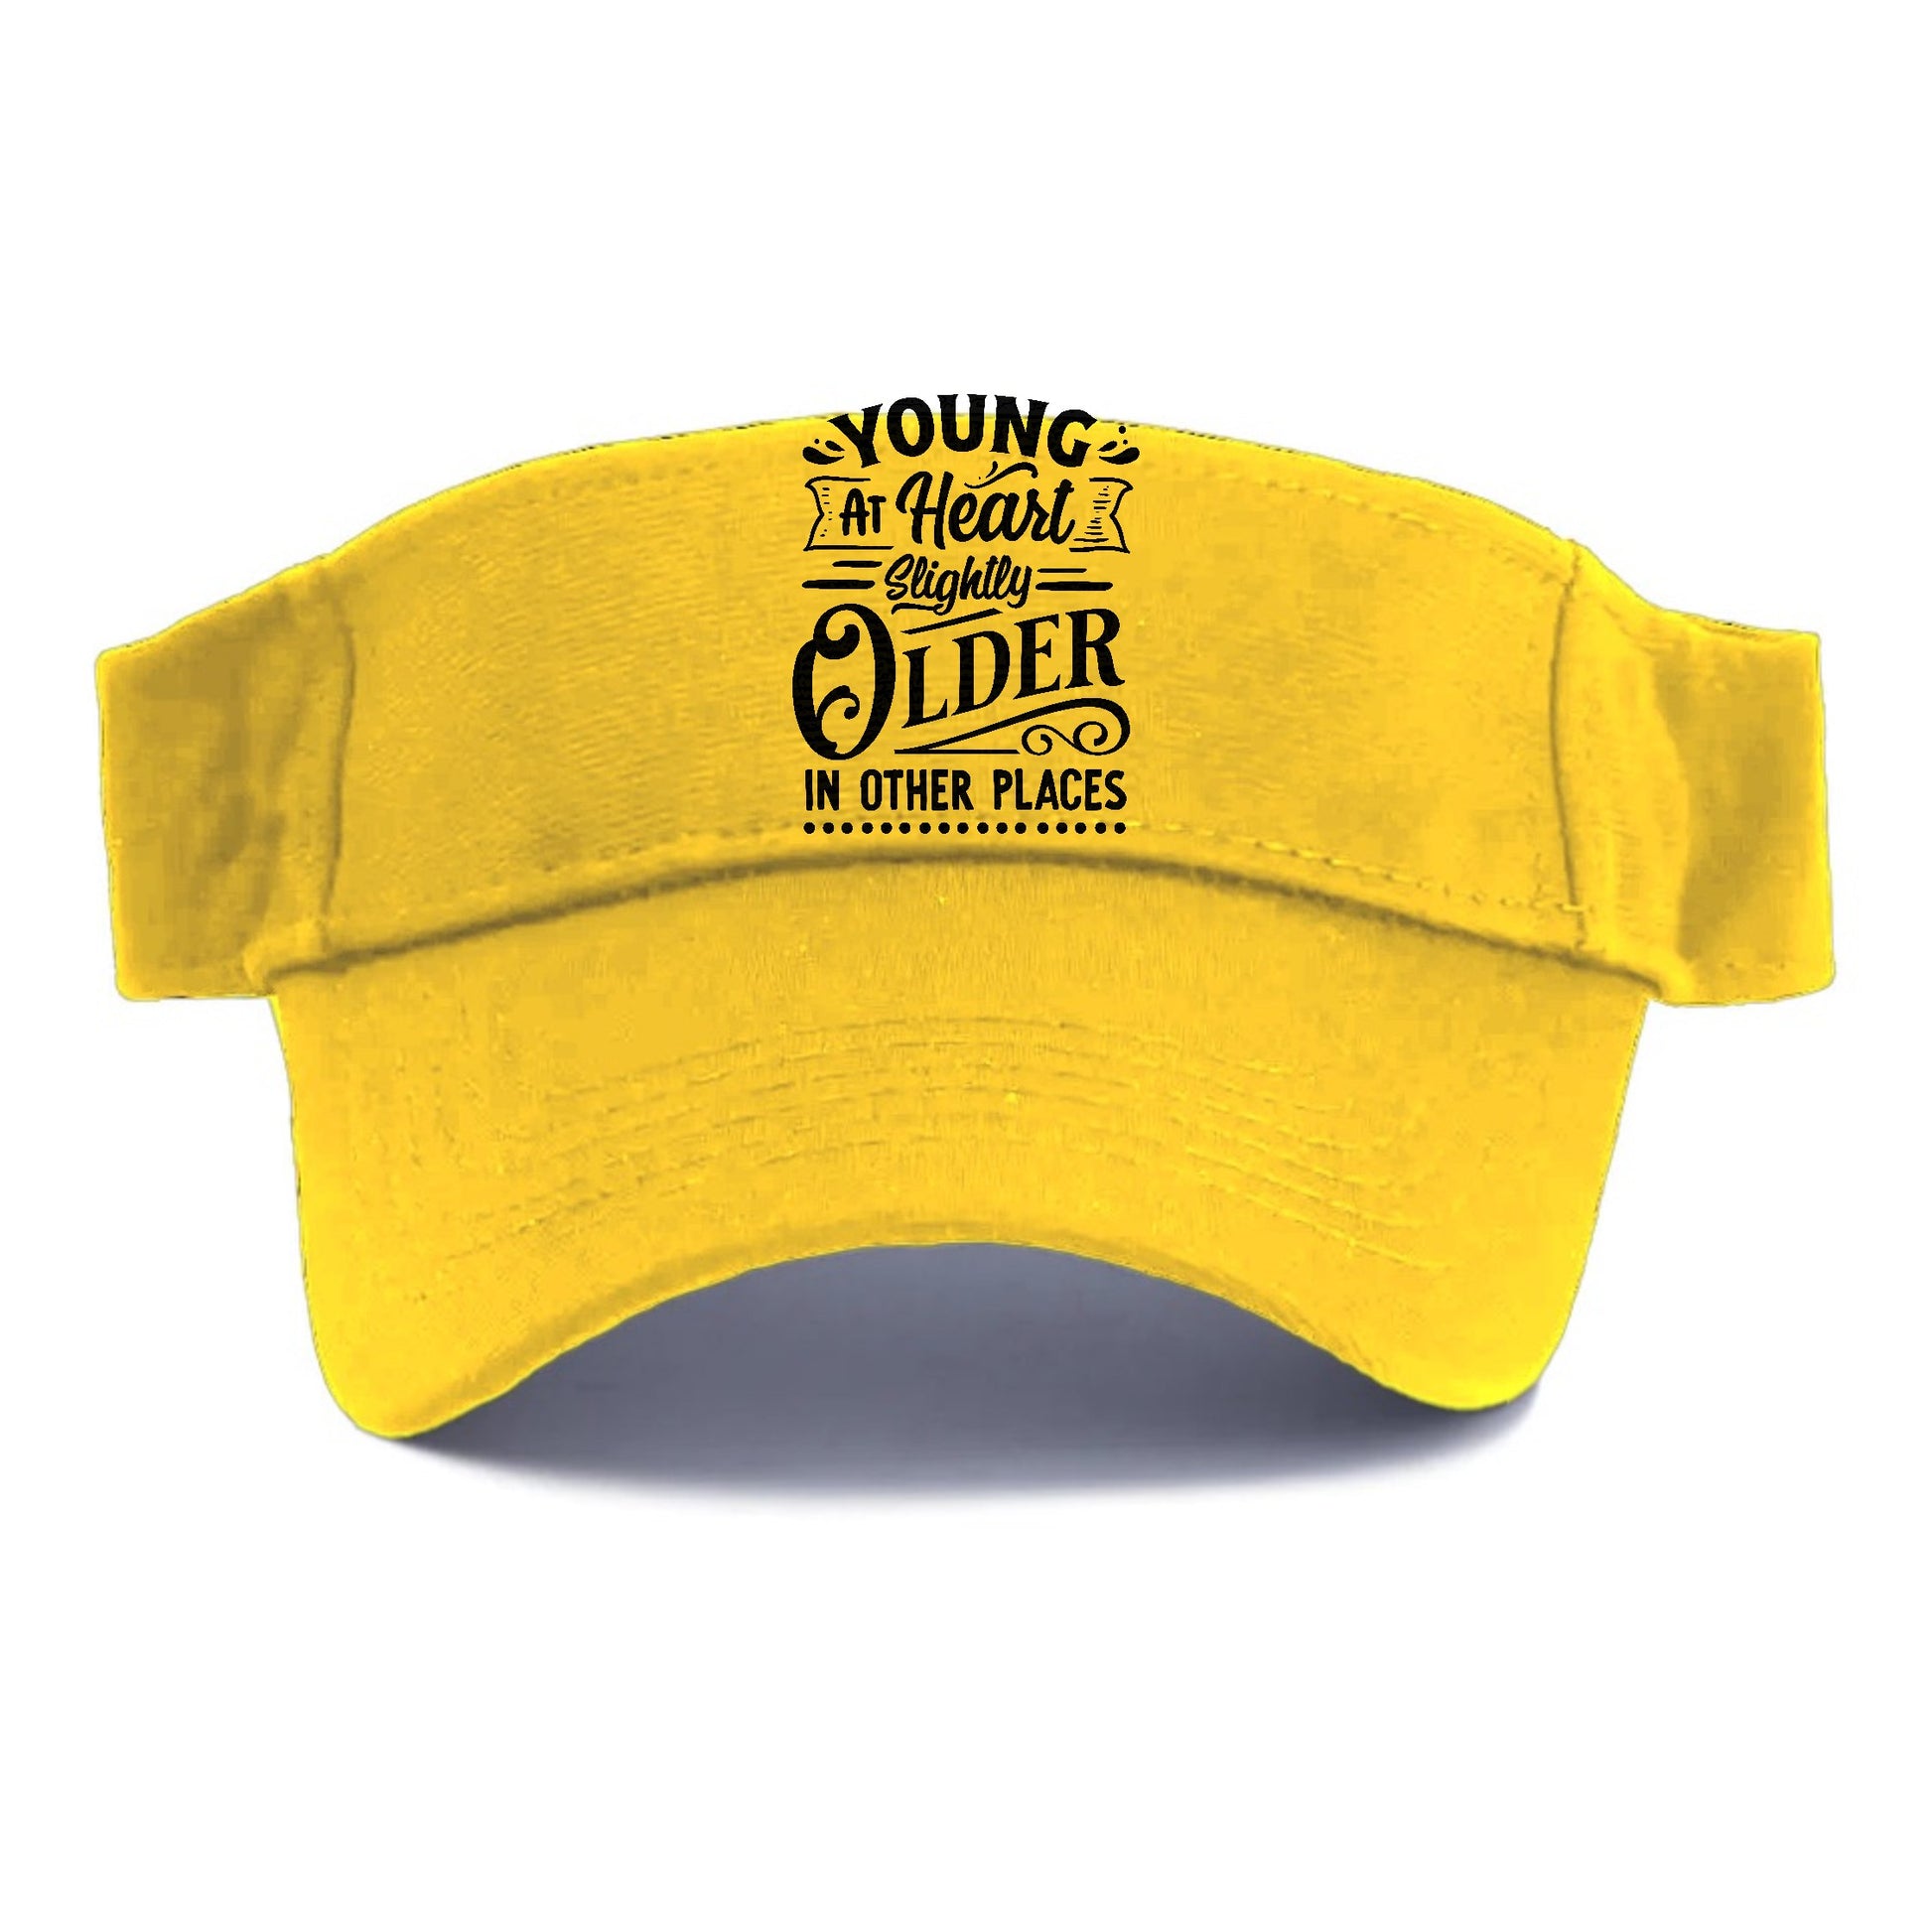 Young at heart slightly older in other places Hat